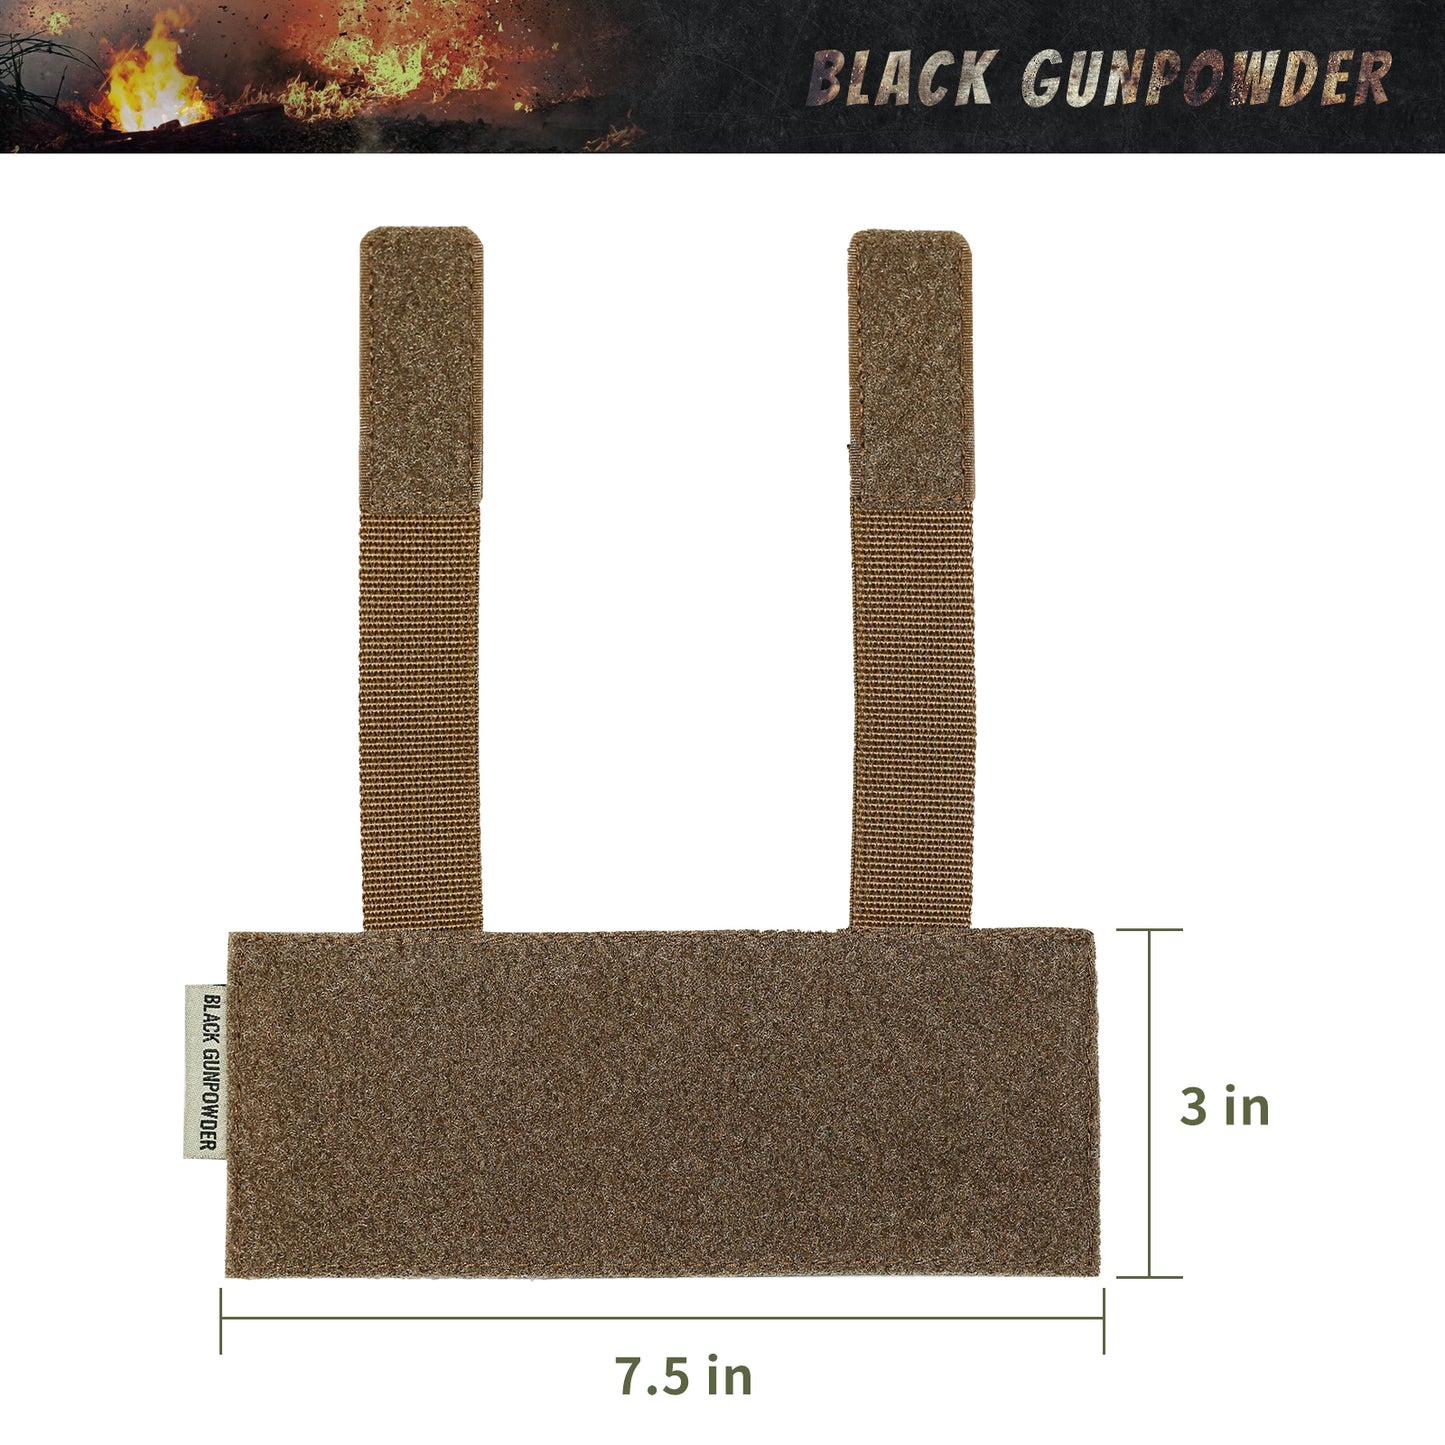 Black Gunpowder Molle Hook and Loop Velcro Panel Tactical Morale Patches Board Even Number  Gear Attachment Coyote Brown Ranger Green (7.5 x 3 in)